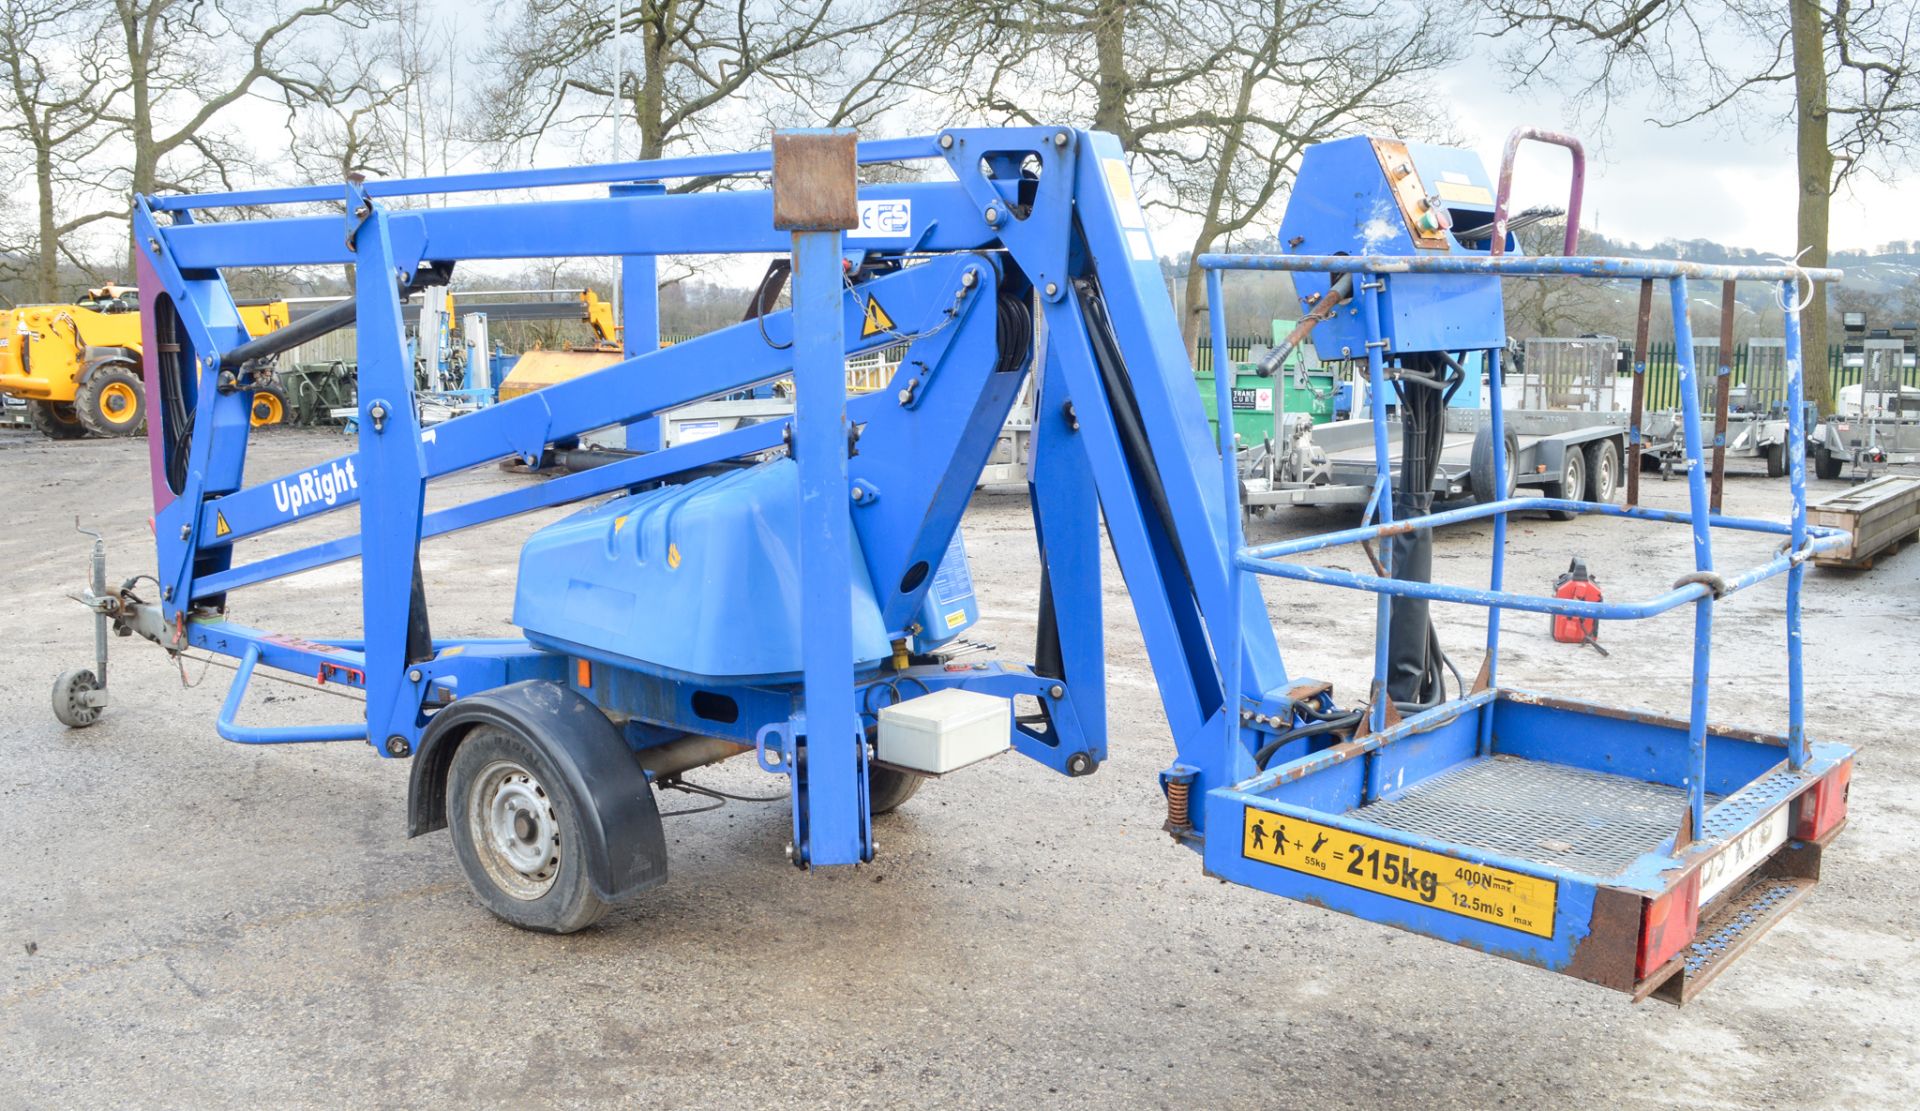 Upright TL37 13 metre battery electric trailer mounted articulated boom access platform Year: 2007 - Image 4 of 8